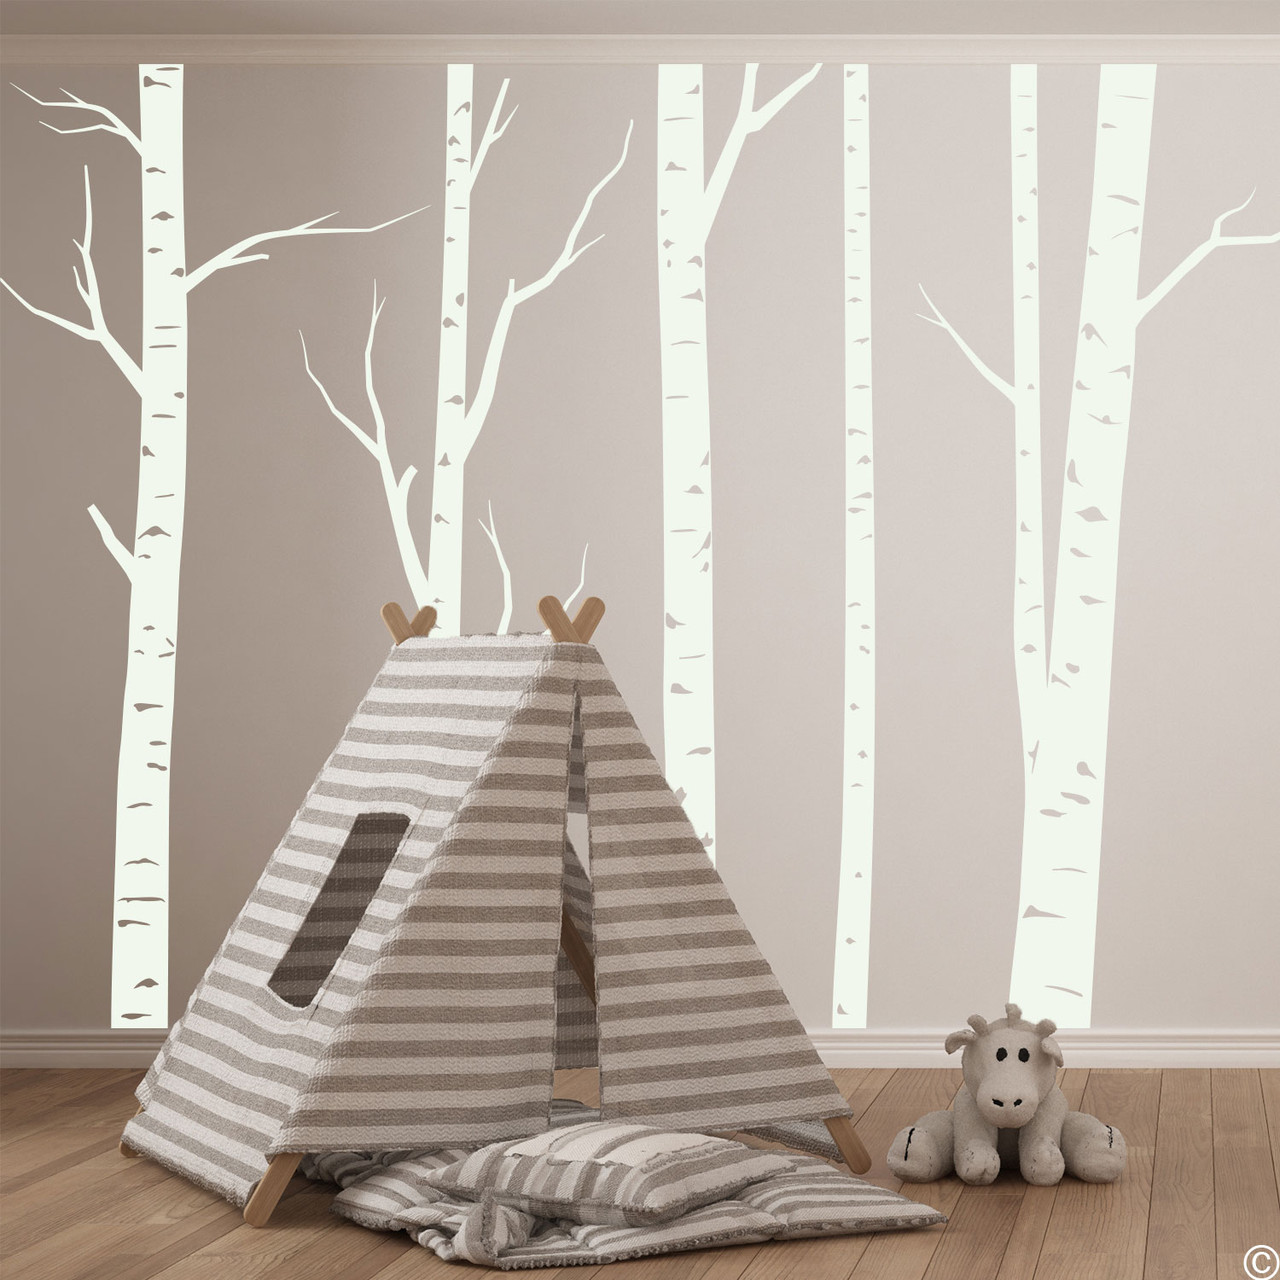 Aspen forest wall decal mural in limited edition antique lace vinyl color.